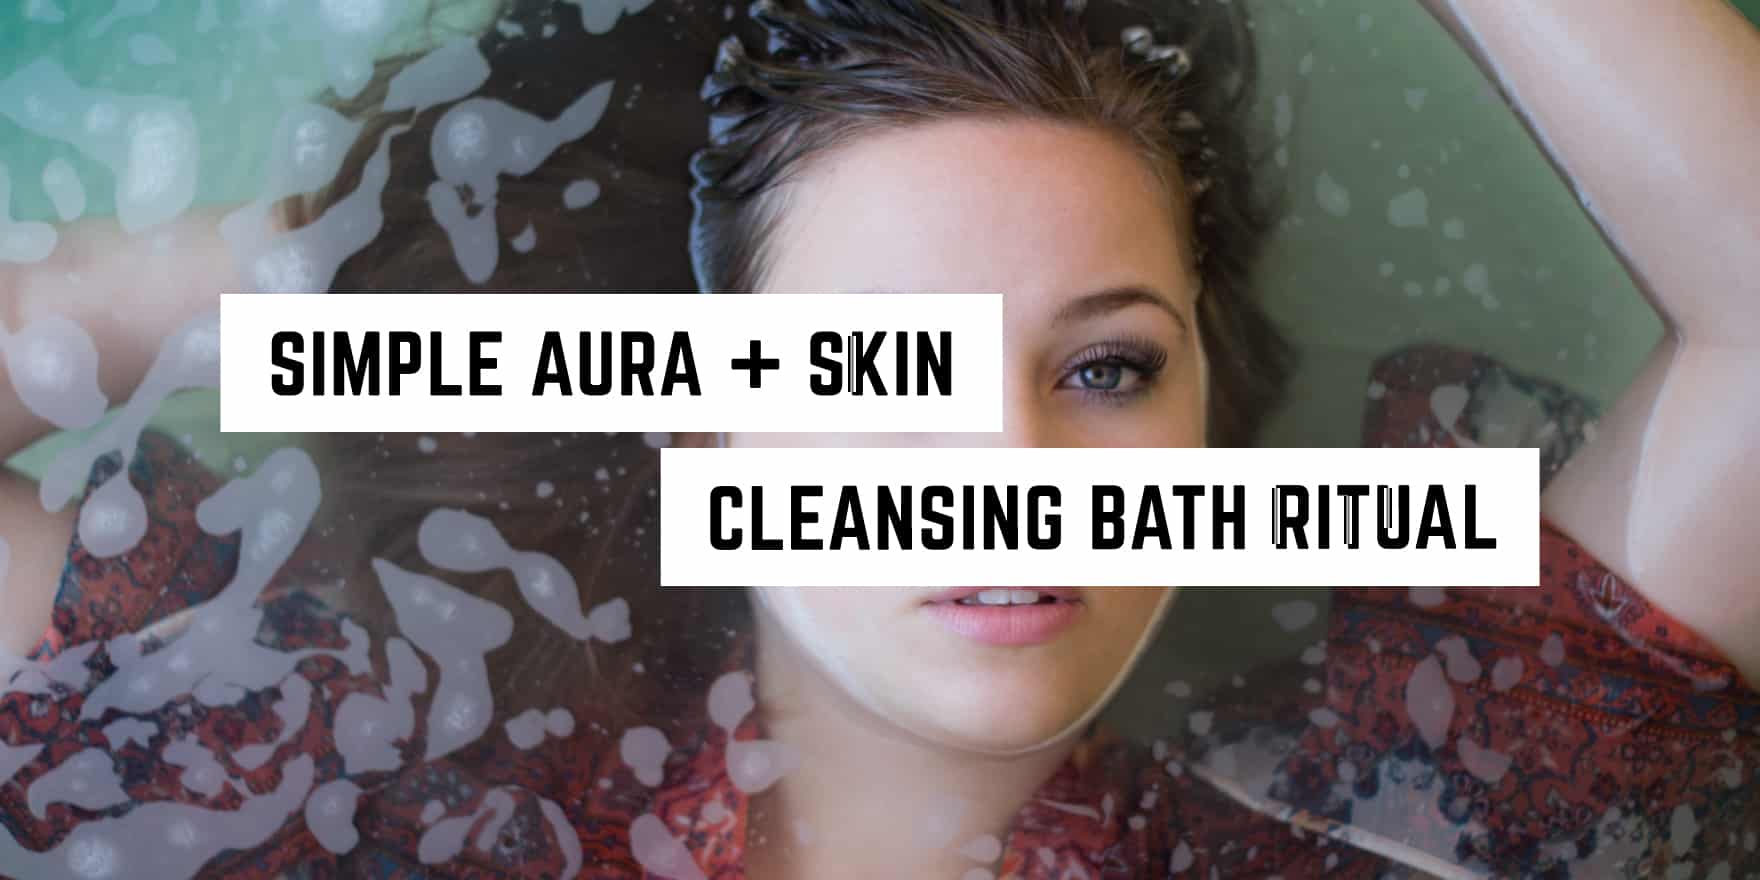 A serene woman soaking in a bath, promoting a peaceful aura and metaphysical skin cleansing ritual.